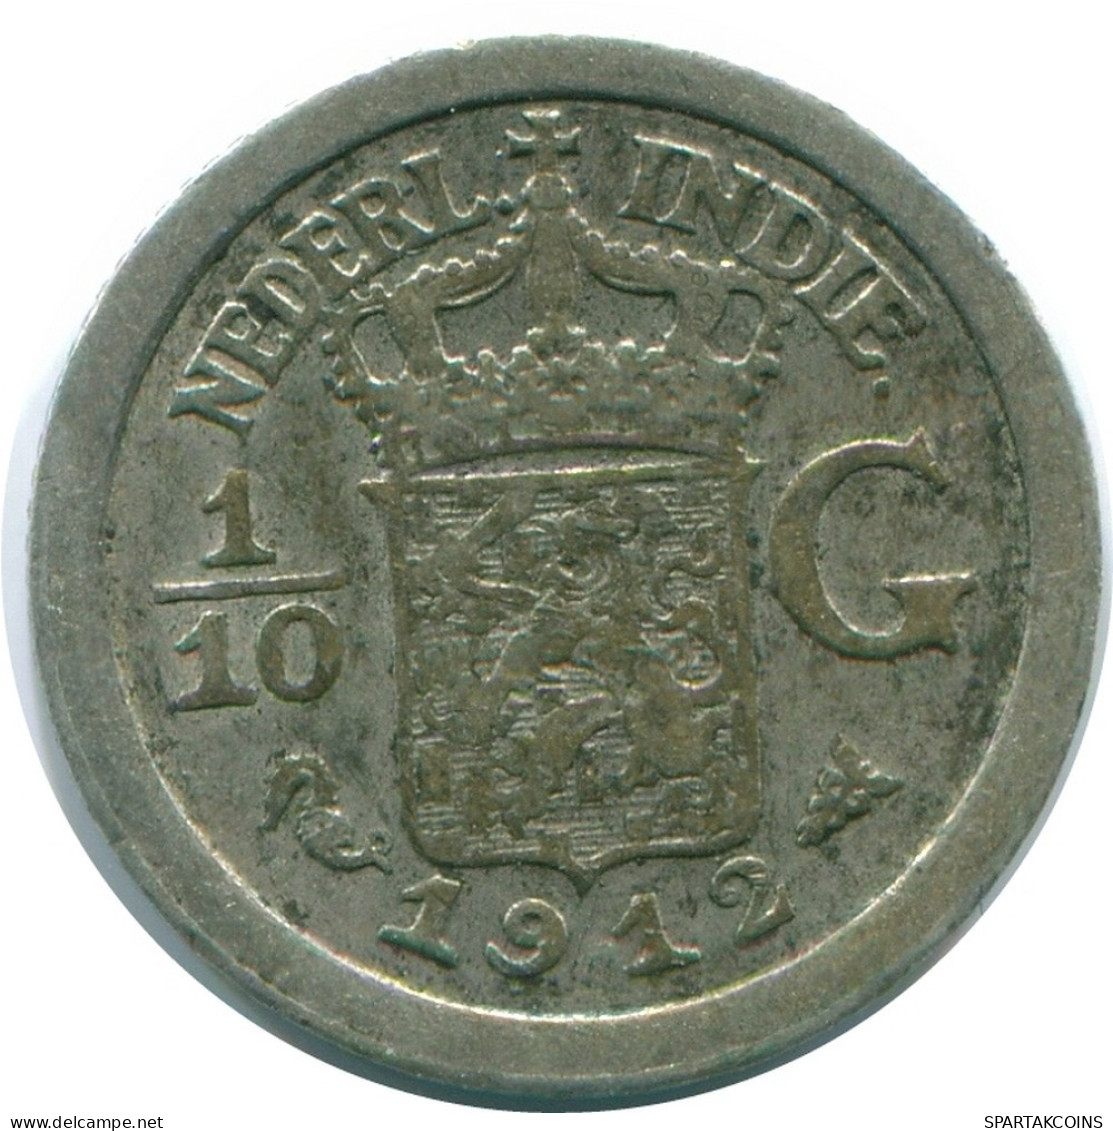 1/10 GULDEN 1912 NETHERLANDS EAST INDIES SILVER Colonial Coin #NL13259.3.U.A - Dutch East Indies